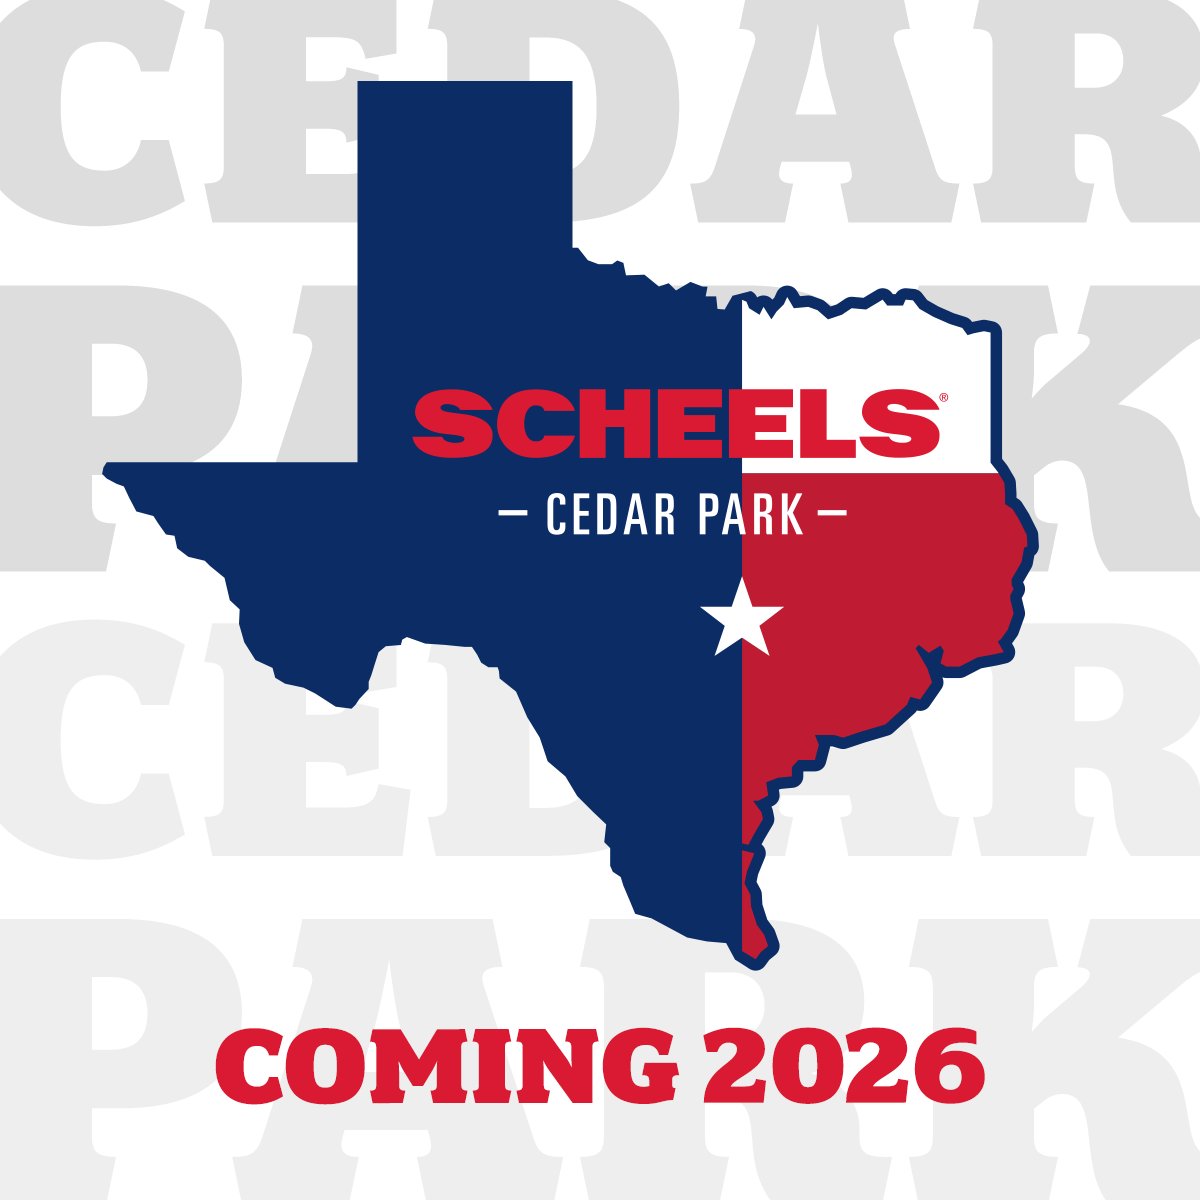 Howdy, Cedar Park! 🤠 We're excited to announce SCHEELS is coming to Cedar Park, TX in 2026! Our store will include a 65-ft Ferris wheel, a 16,000-gallon saltwater aquarium, a wildlife mountain, Fuzziwig’s Candy Factory and more. We can't wait to join the Cedar Park community!